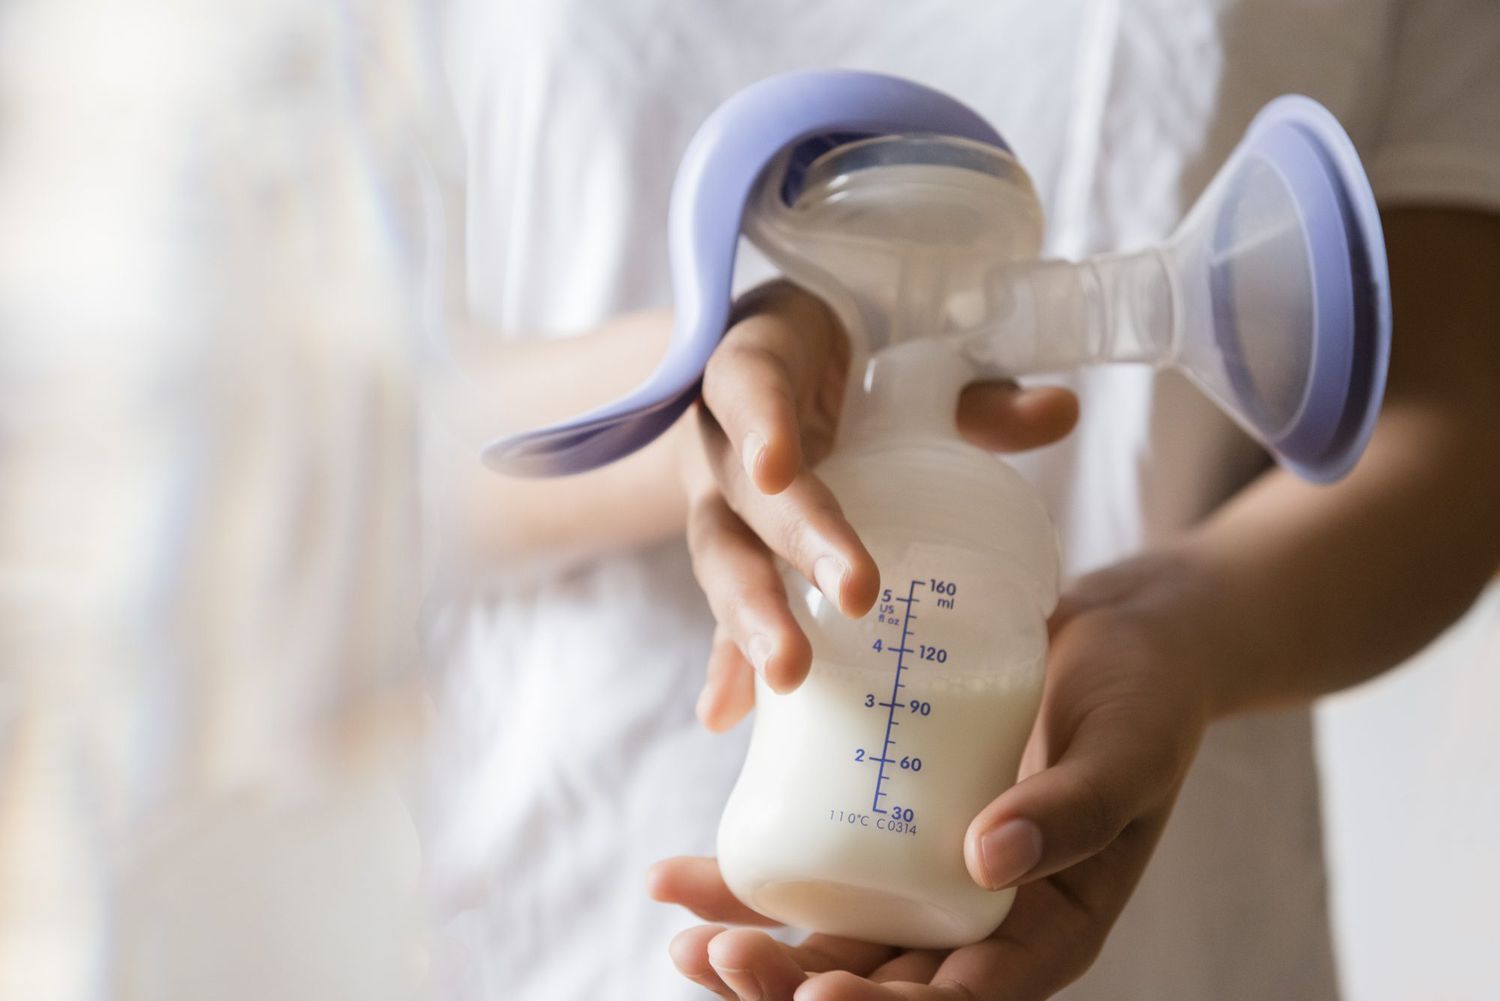 An image of a breast milk pump.